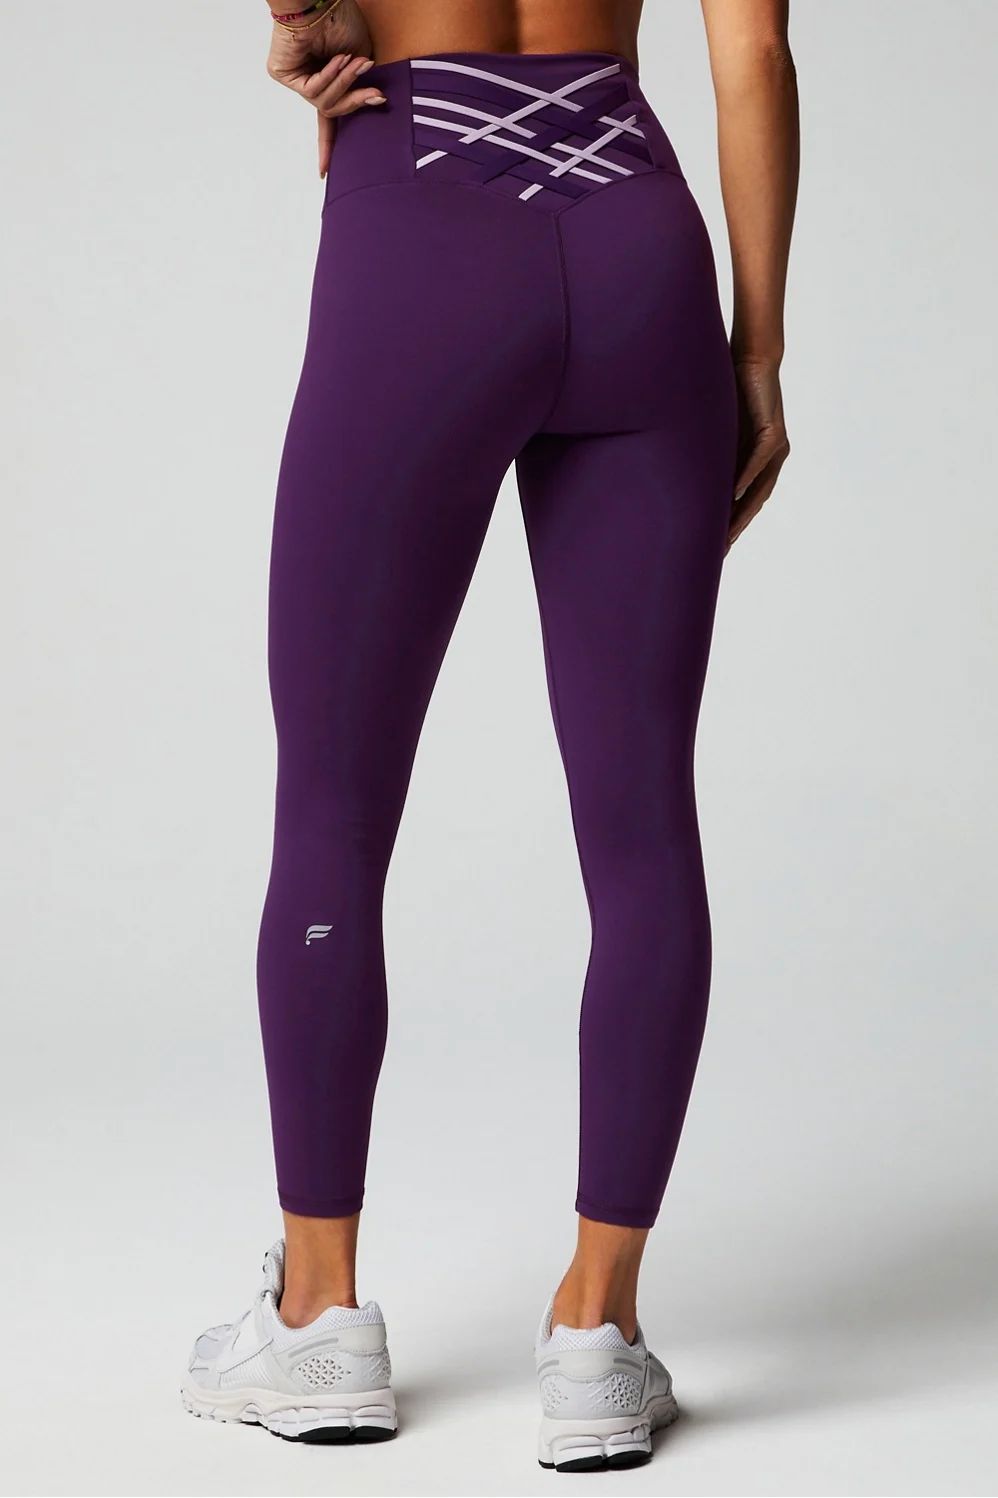 Boost Powerhold® High-Waisted 7/8 Legging | Fabletics - North America